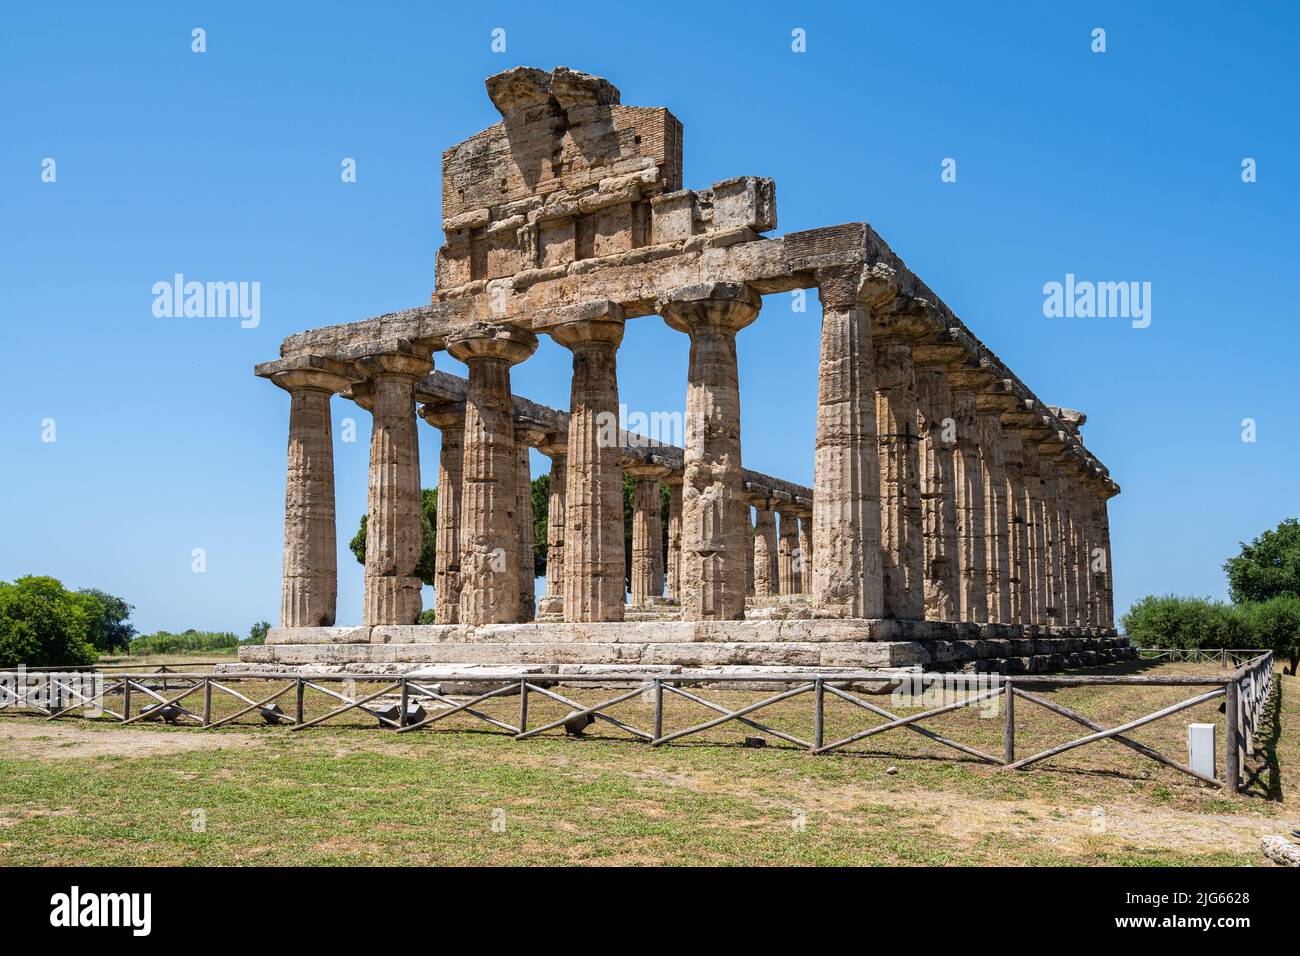 Temple of Athena at Paestum archaeological site, Campania, Italy Stock Photo